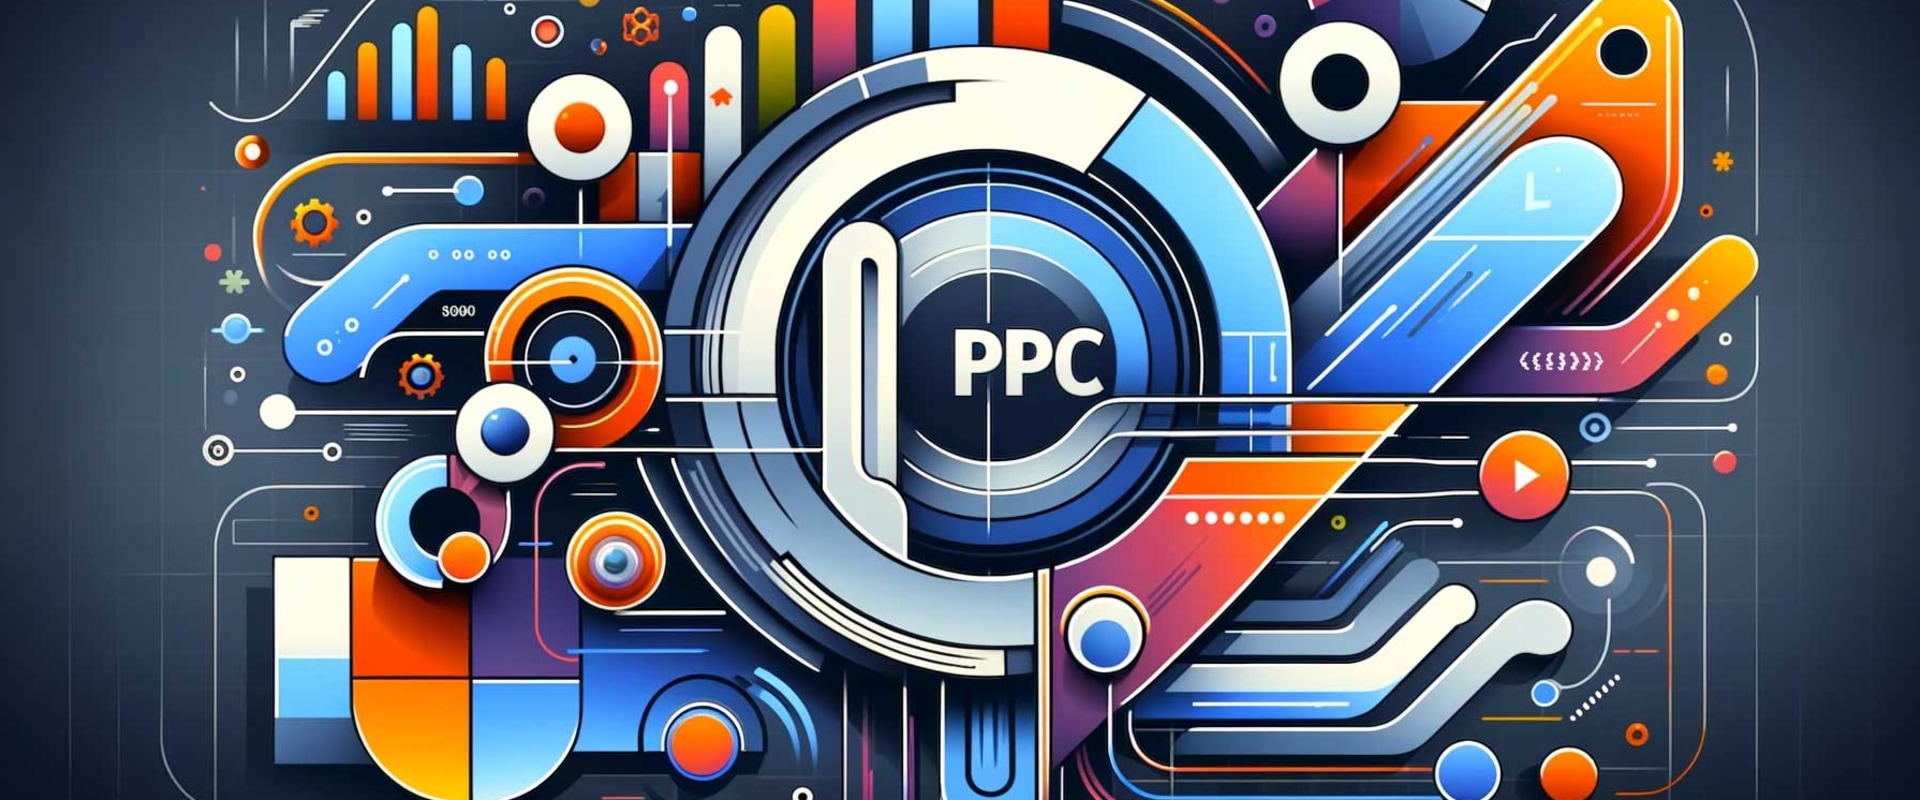 How to start ppc advertising?